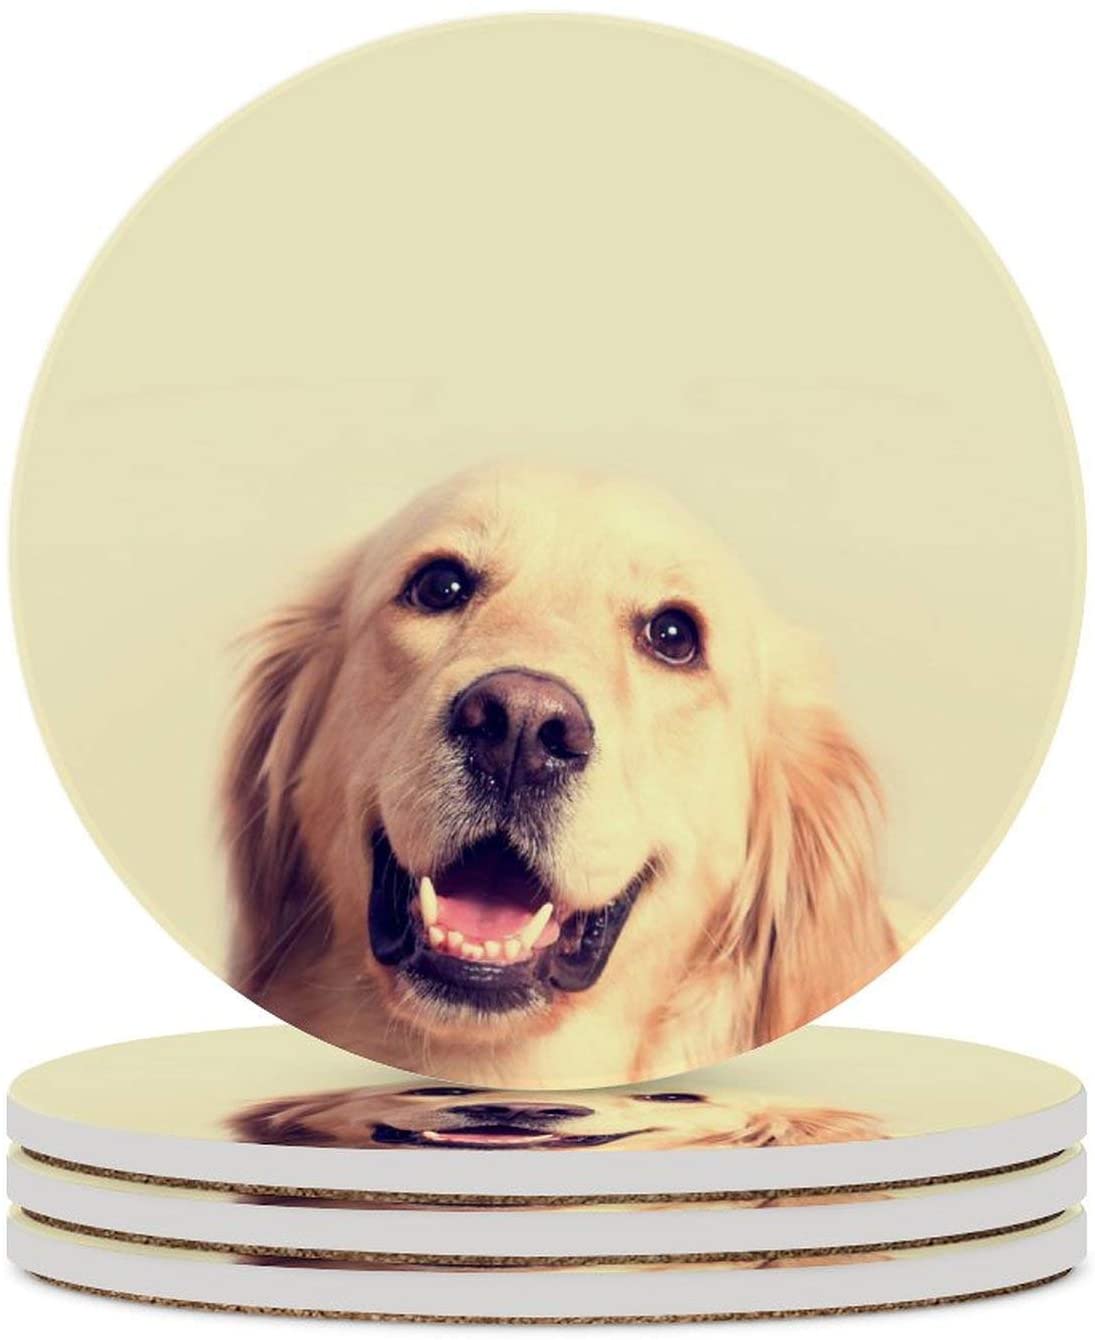 Ceramic Cork Drink Coasters Absorbent Cute Golden Retriever Dog Round Coasters Set of 4 Housewarming Gifts Wine Accessories Rustic Dining Room Decorations